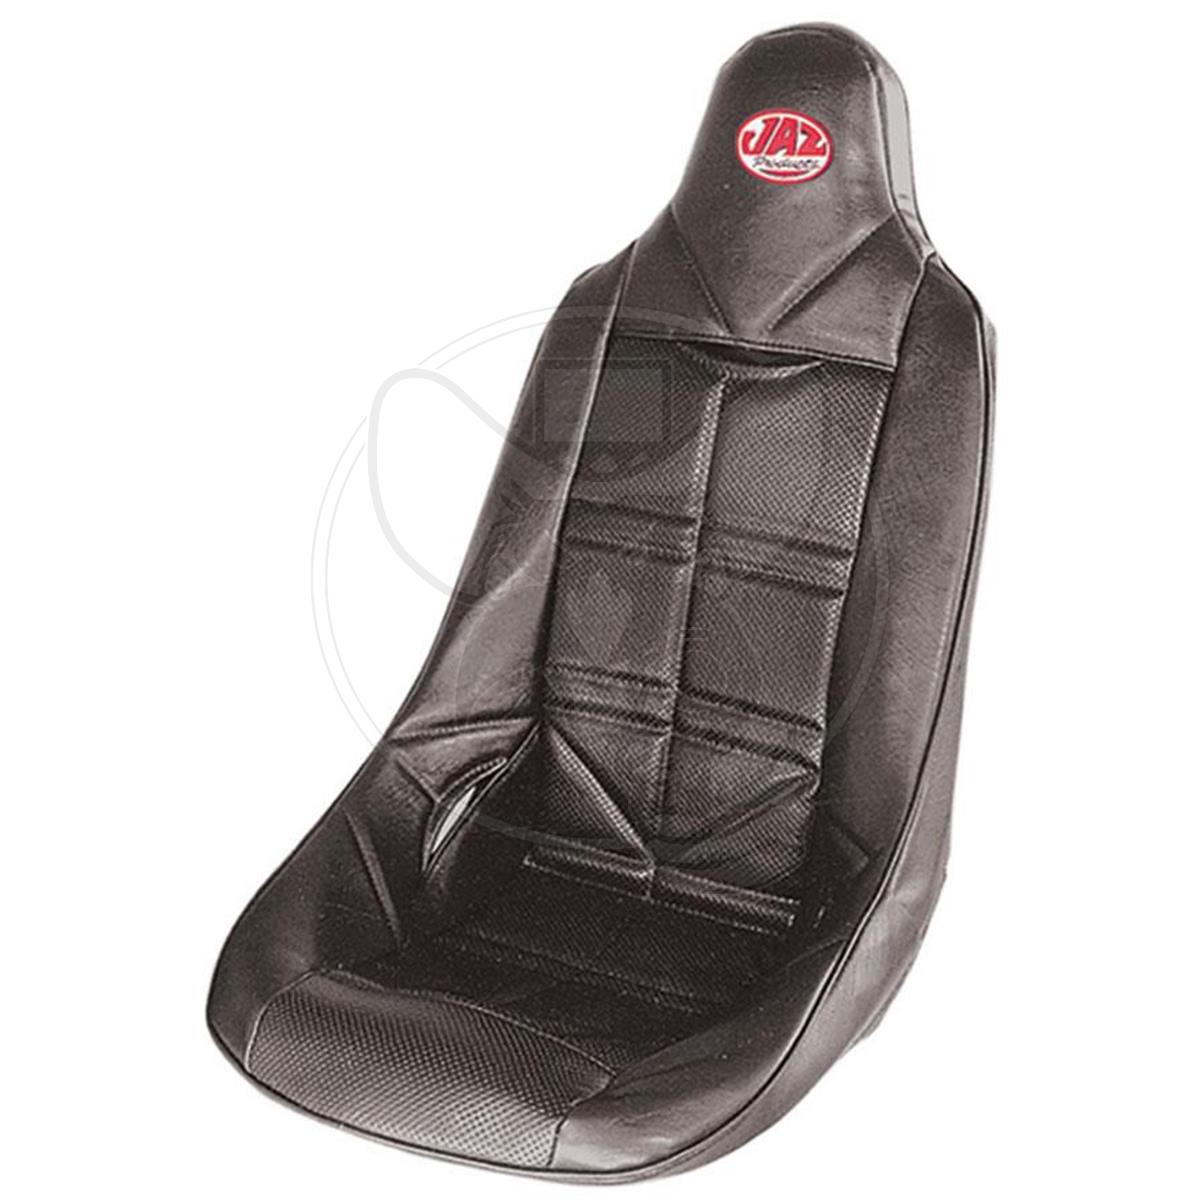 JAZ SEAT COVER PADDED BLACK FITS POLY SEAT